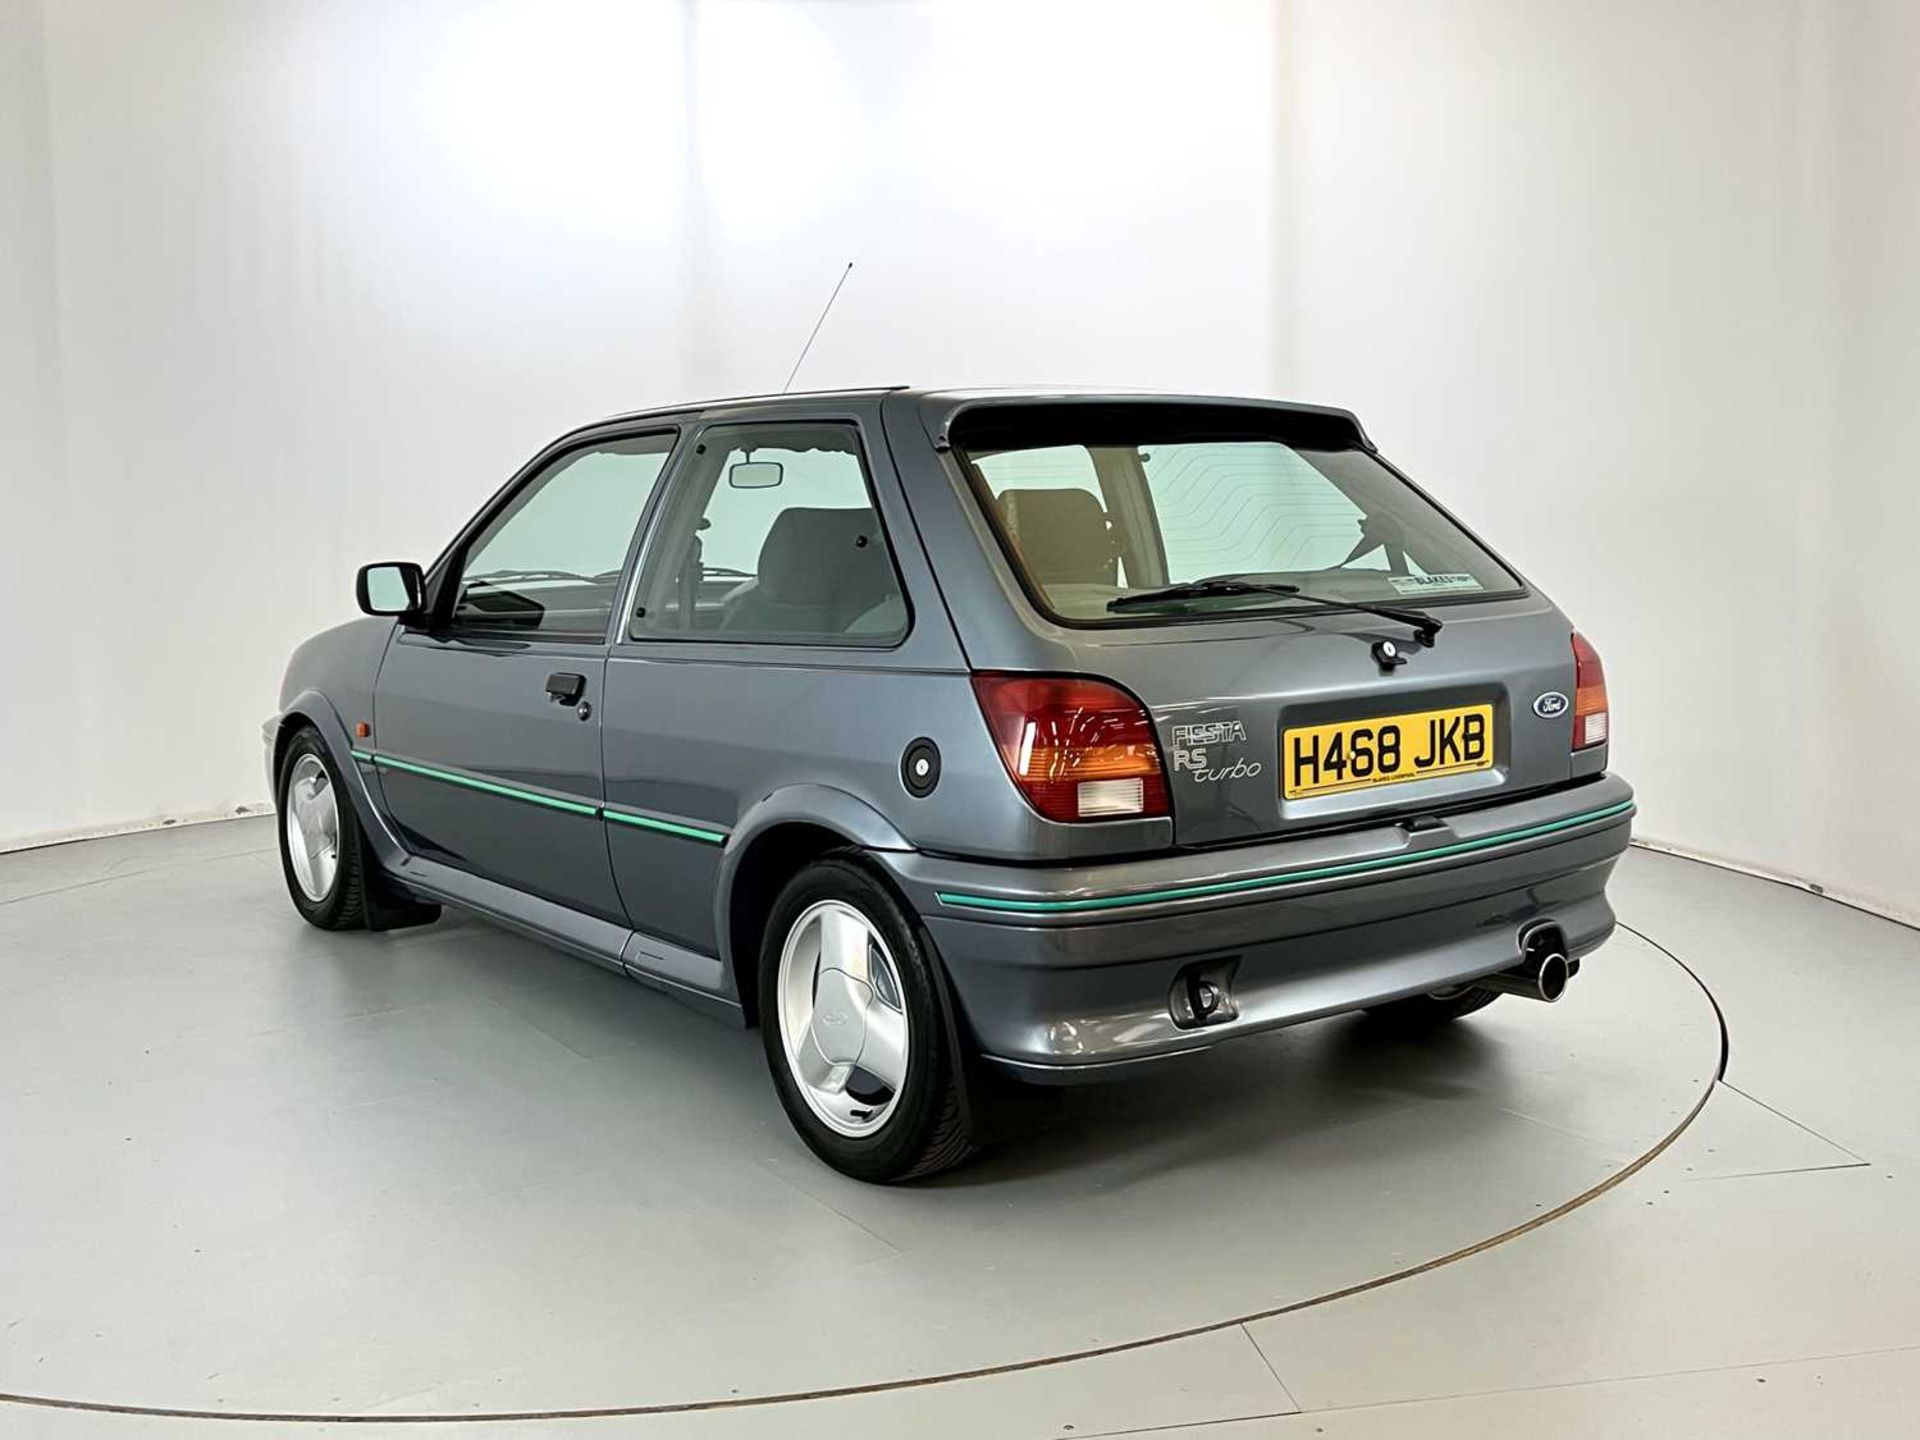 1991 Ford Fiesta RS Turbo - Image 7 of 32